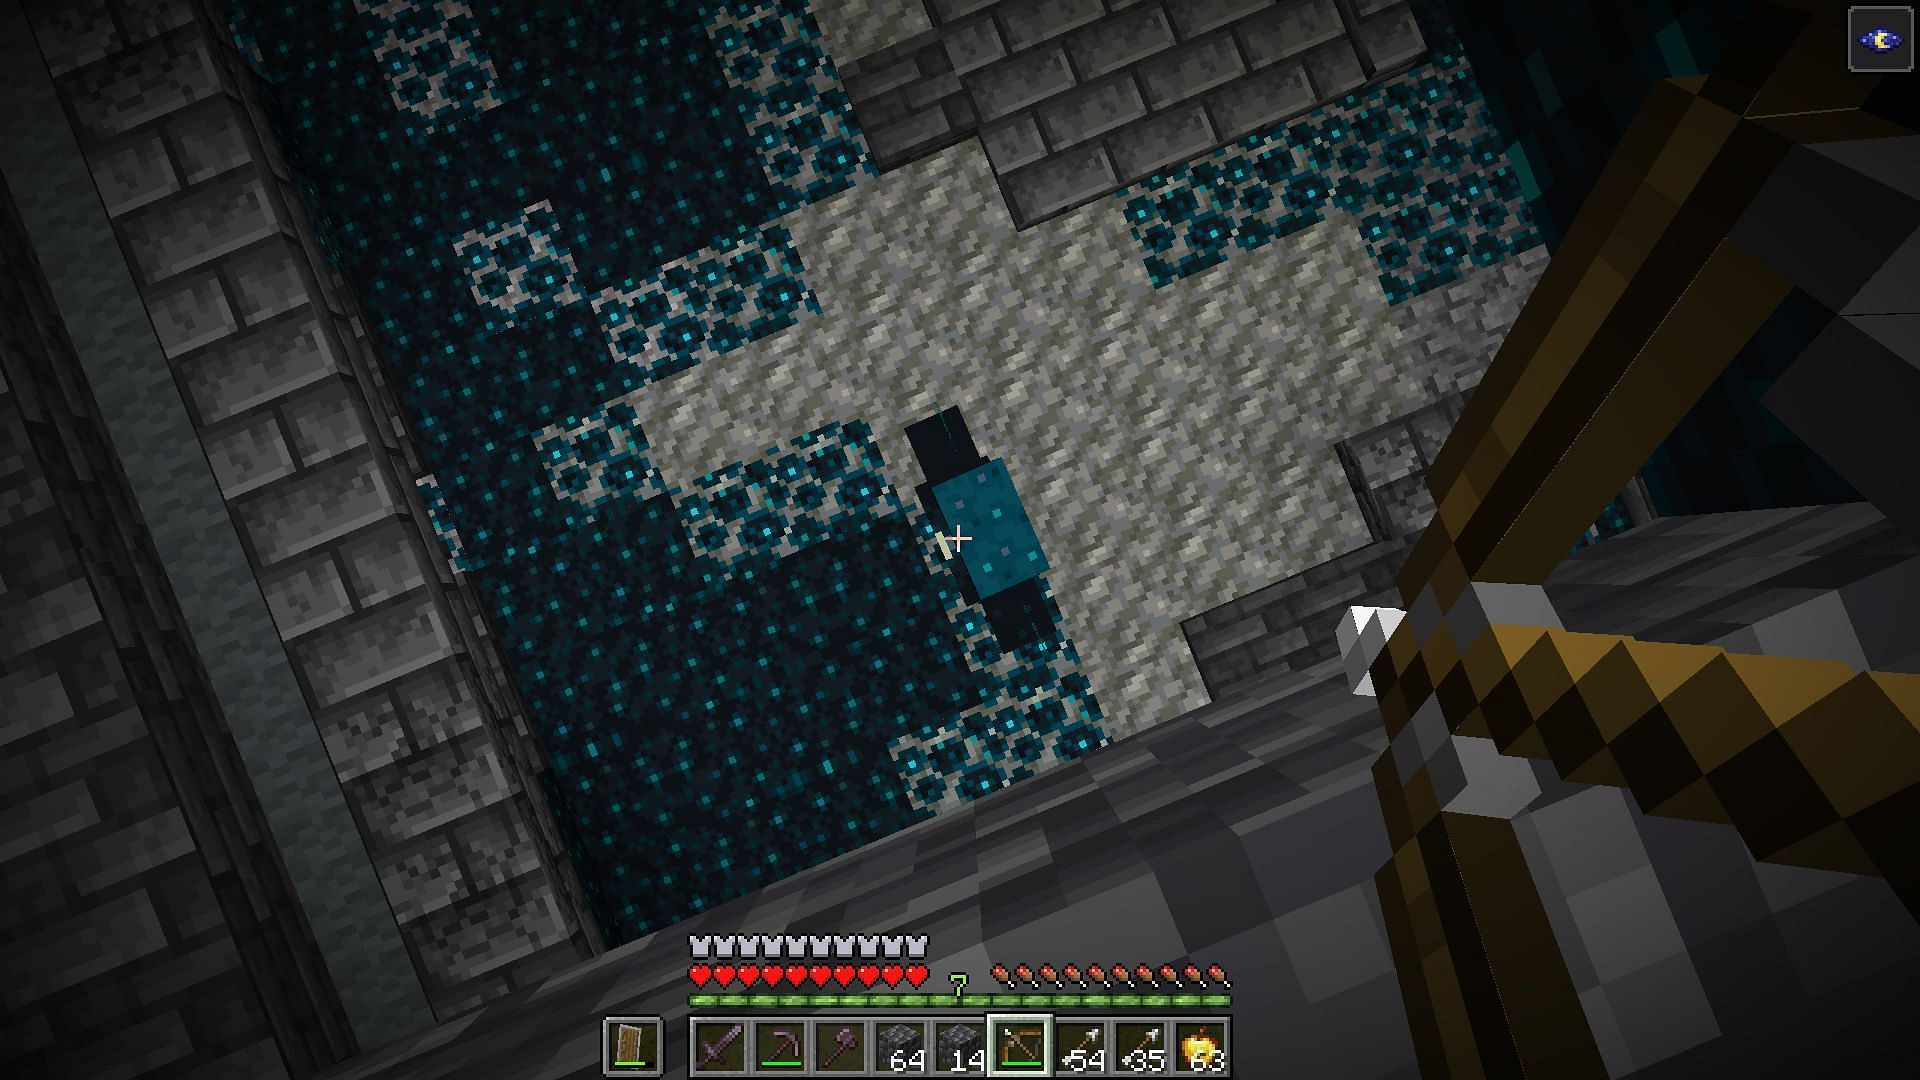 Players need to be at least 16 blocks away to evade the attack (Image via Minecraft)